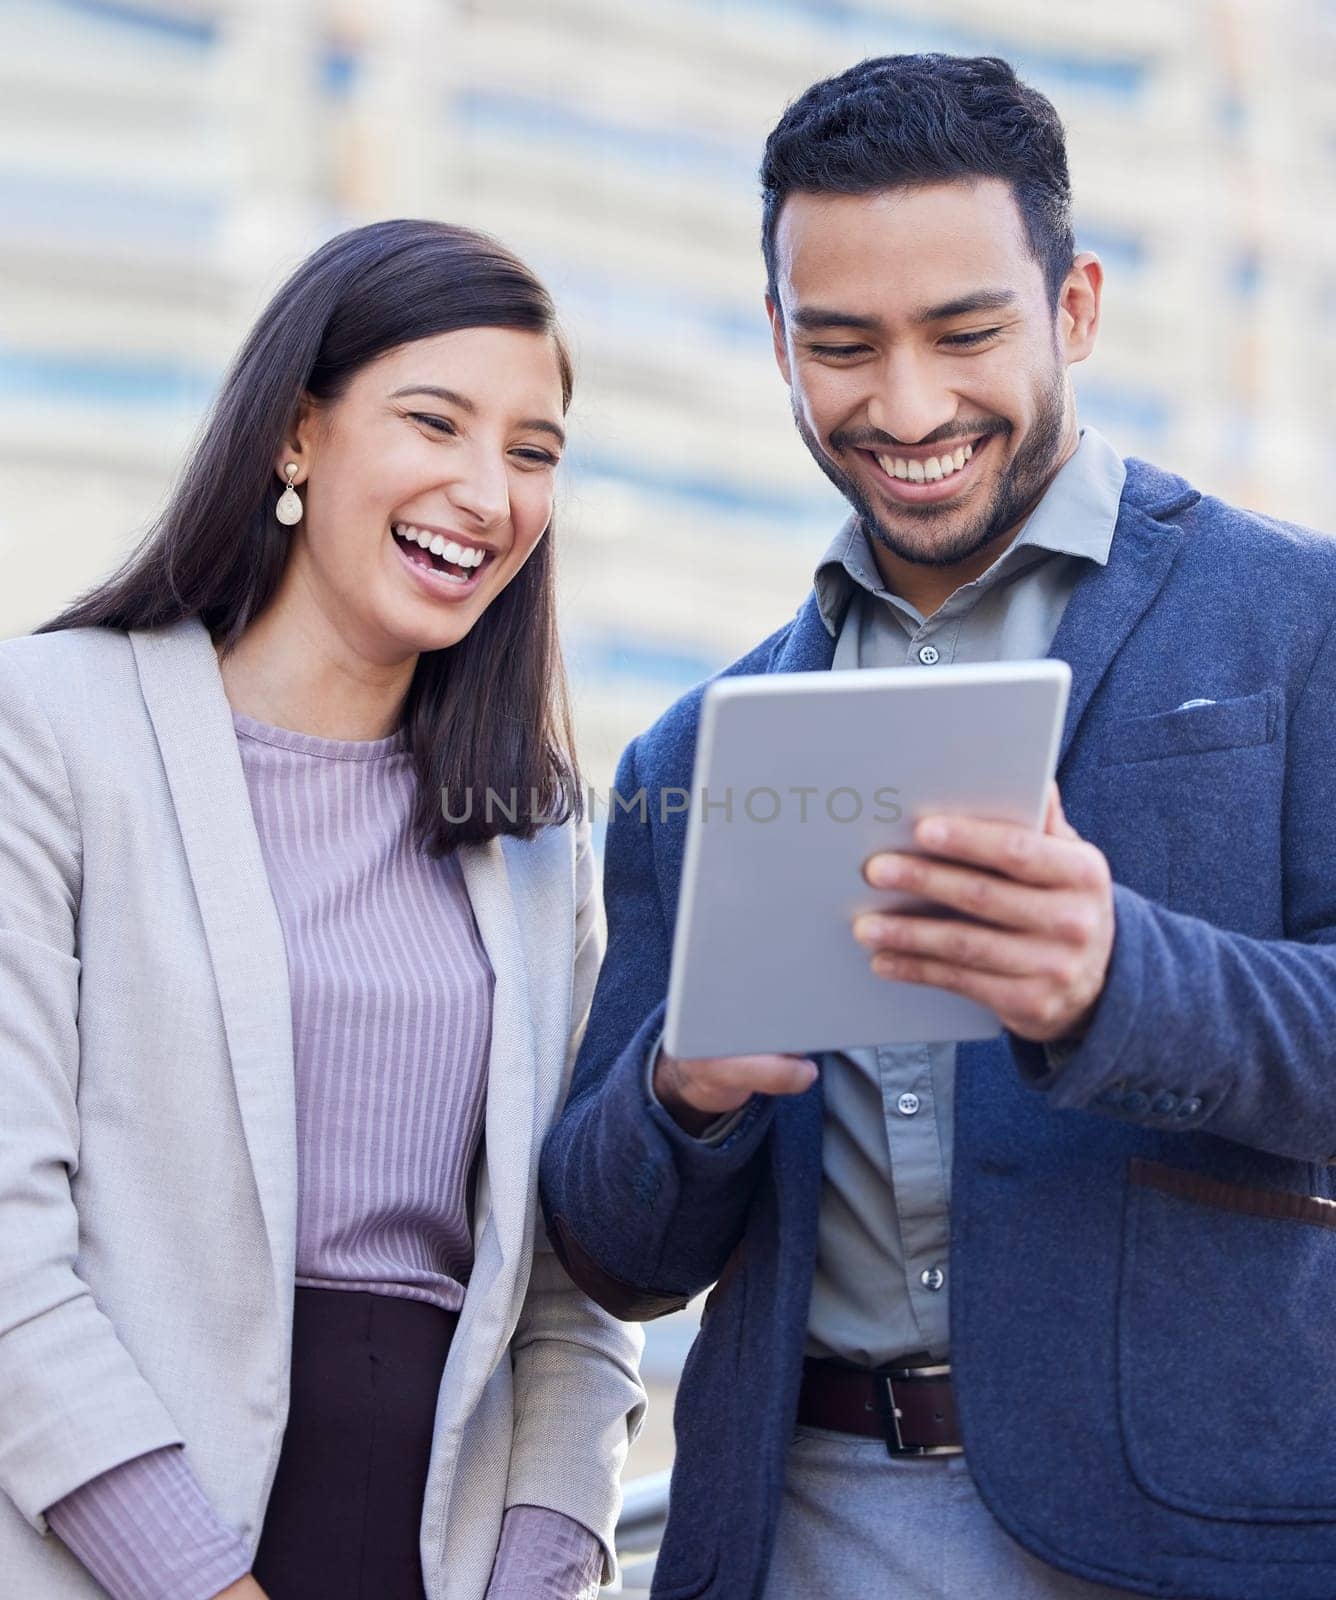 Business people, tablet and team laughing outdoor in a city with internet connection for social media. Happy man and woman together on urban background with tech for networking, communication or app.